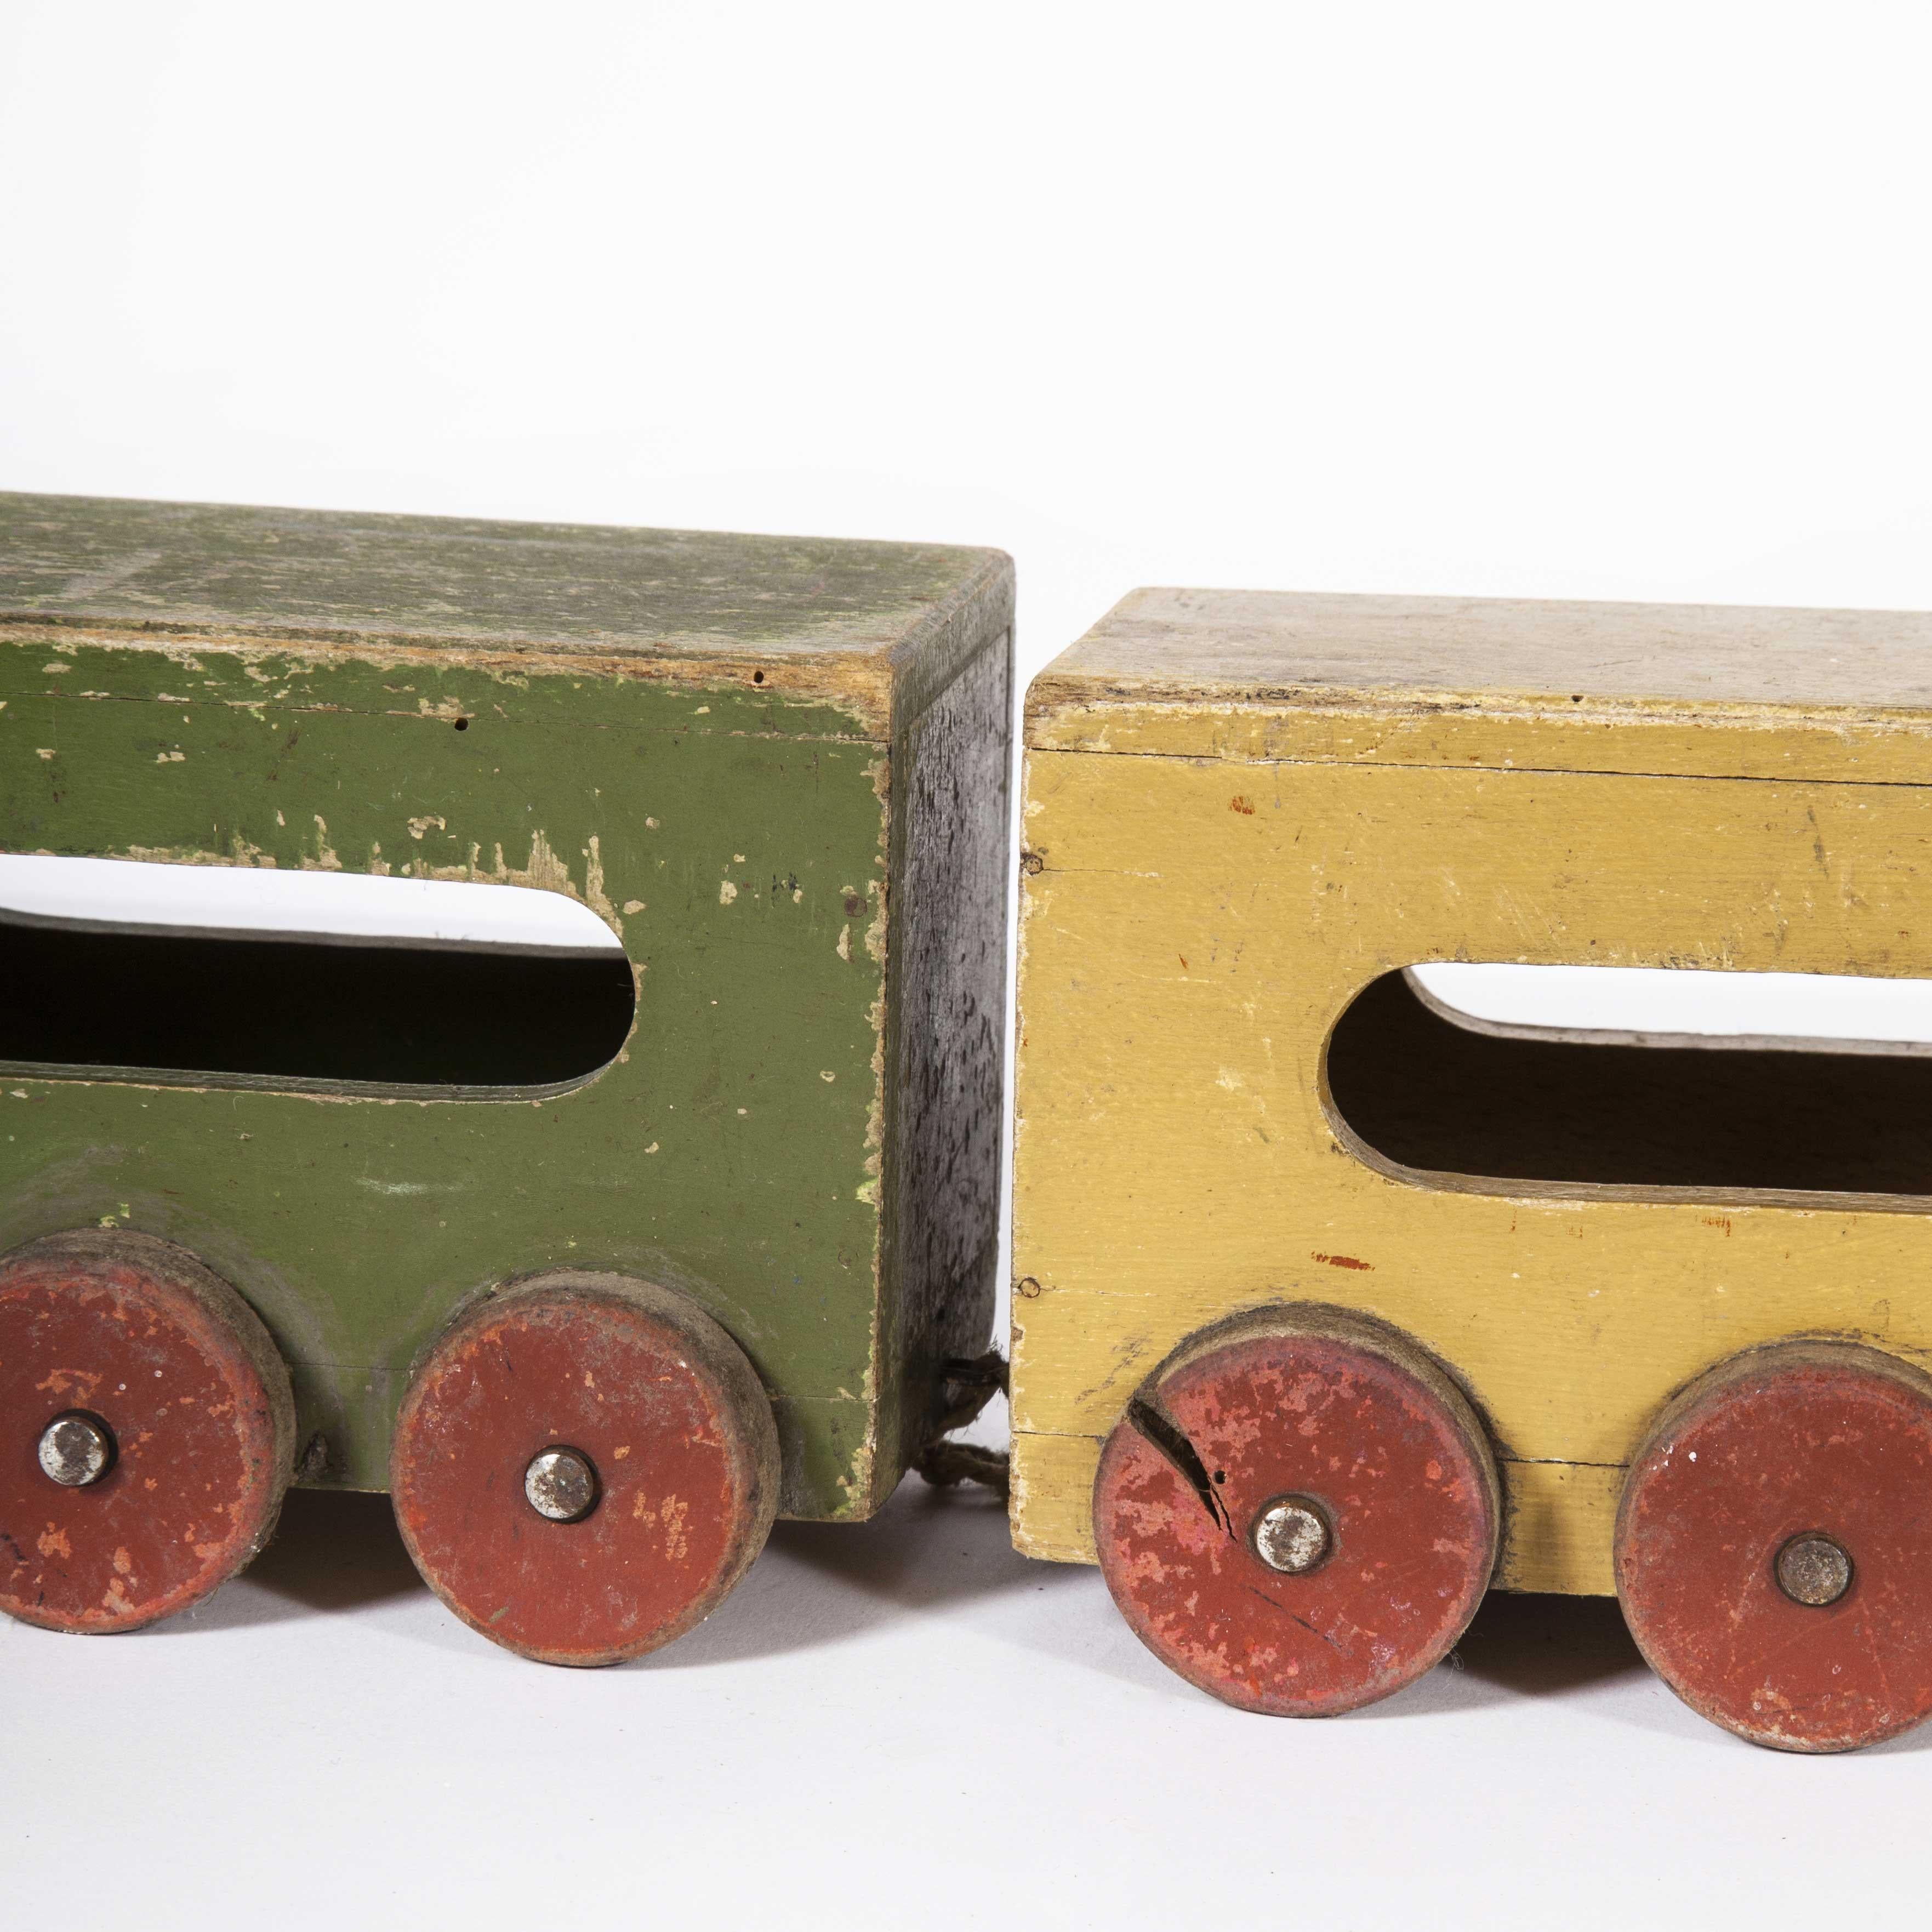 1950s wooden toy train. Beautiful aged and well used wooden toy train. Please note this is a vintage toy and is sold as a decorative item. The toy may not comply with current toy regulations and should not be given to small children.

Workshop